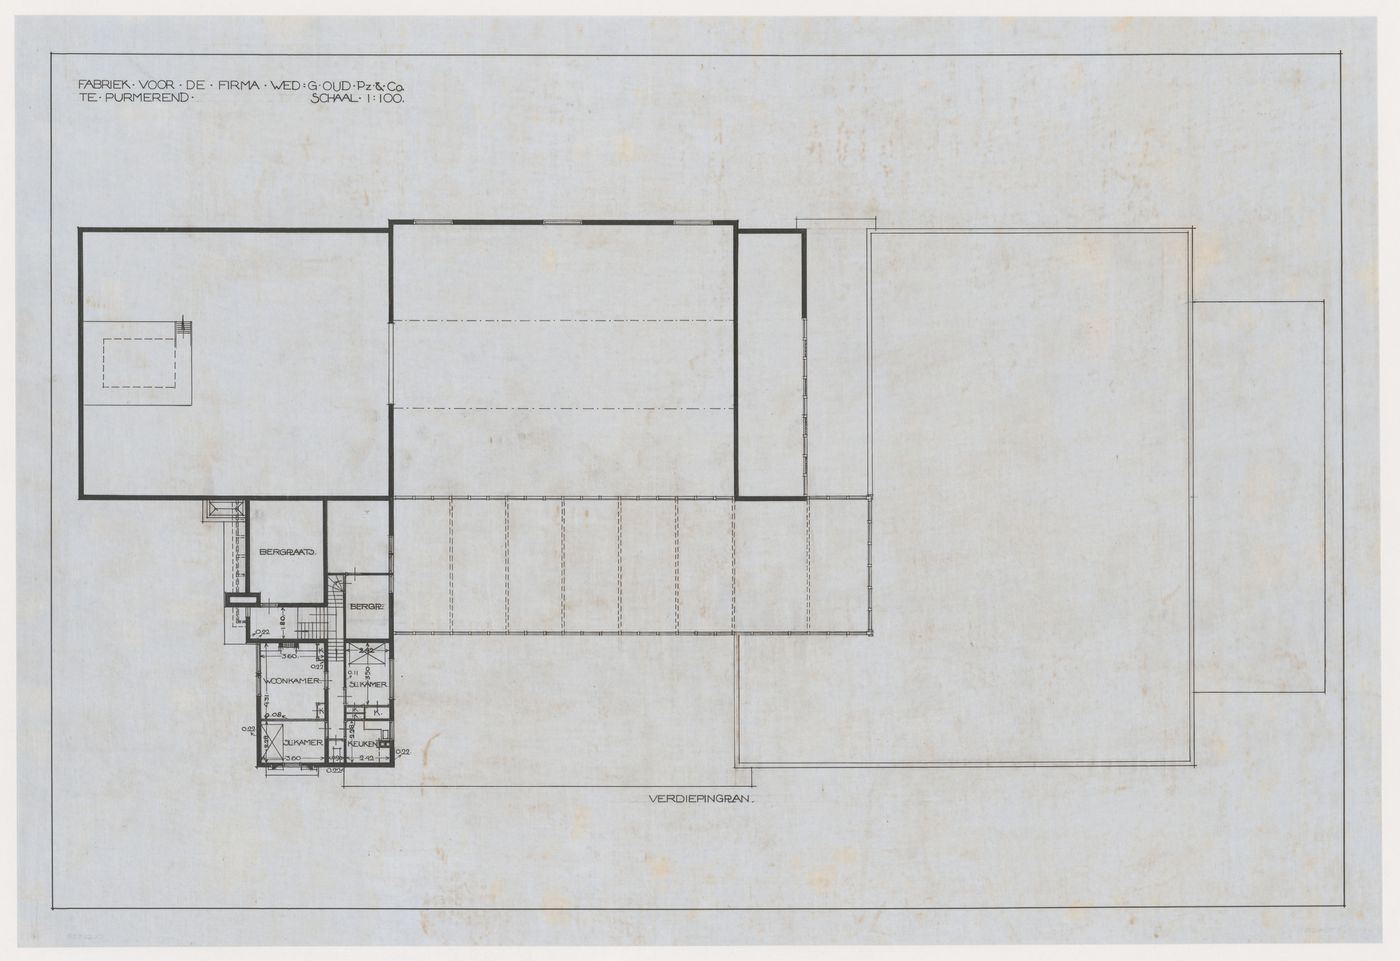 Second floor plan for a winery, Purmerend, Netherlands